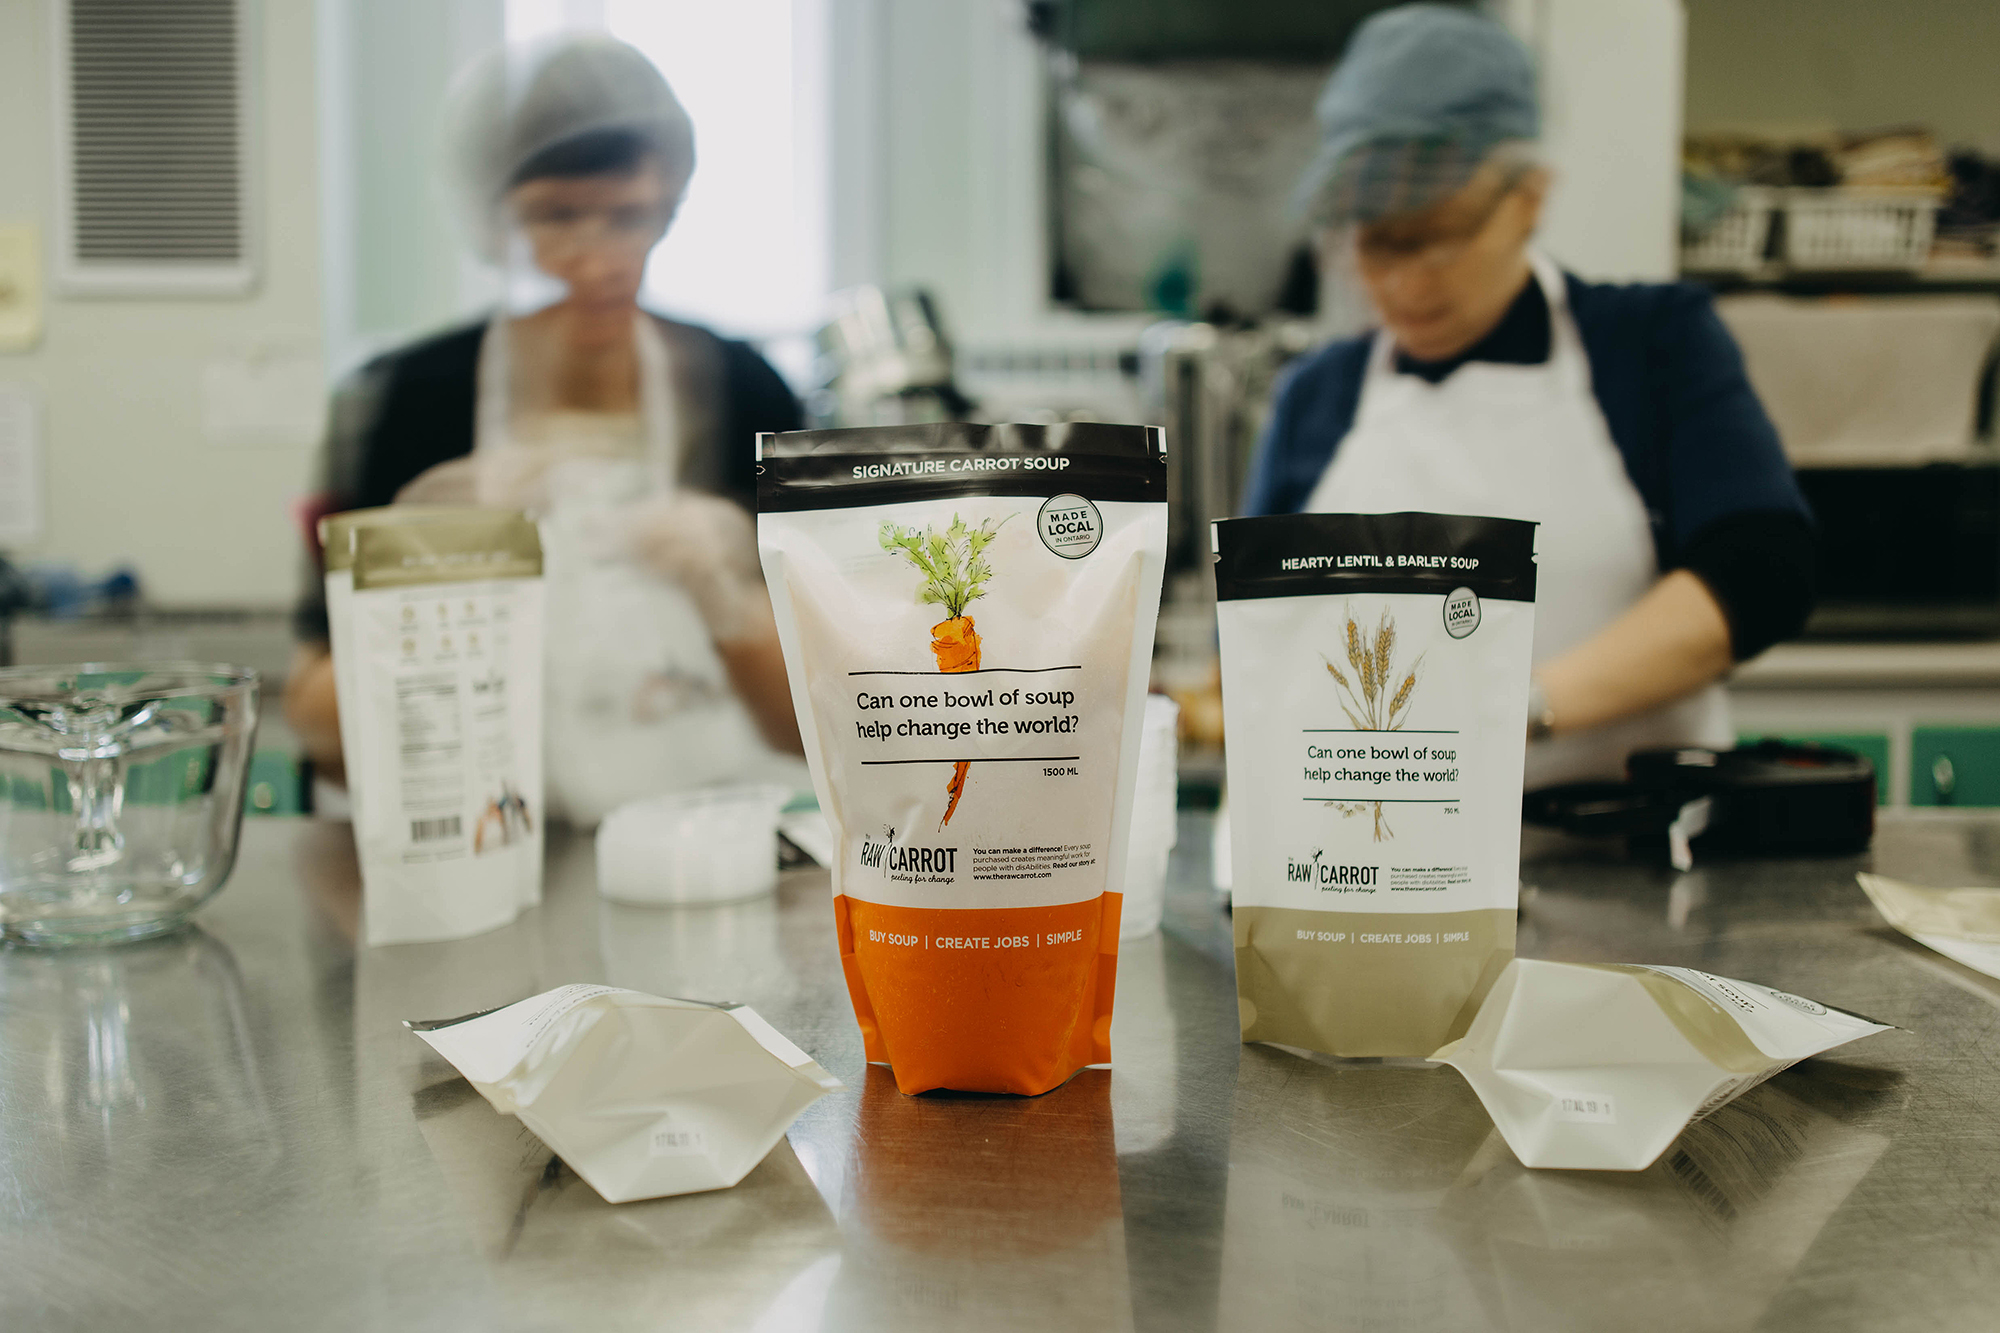 Raw carrot packages with employees blurred in the background.